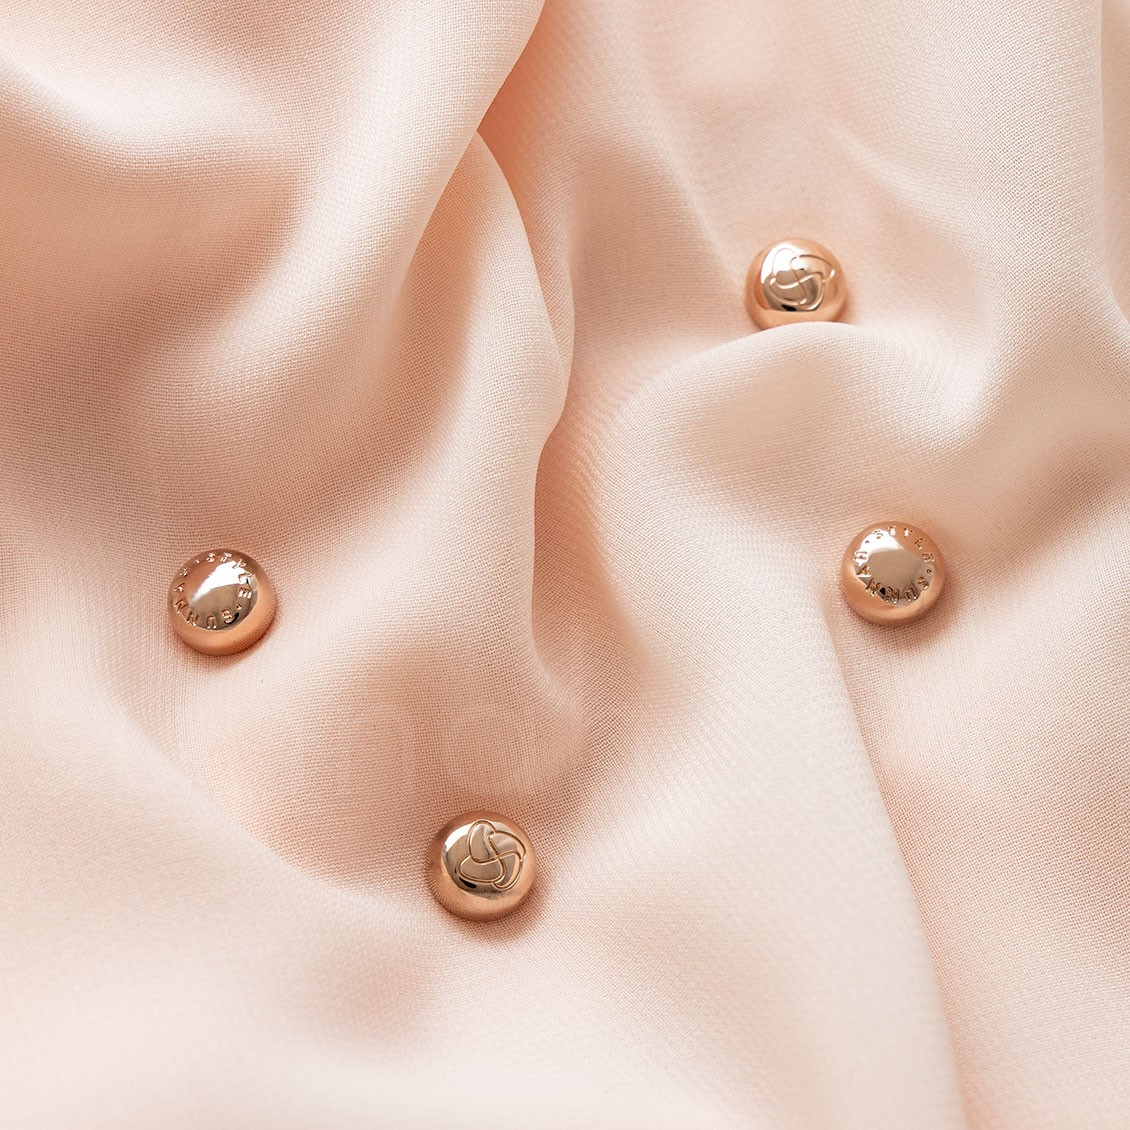 Sunnah Style Esteem Wearable Hijab Magnets Rose Gold